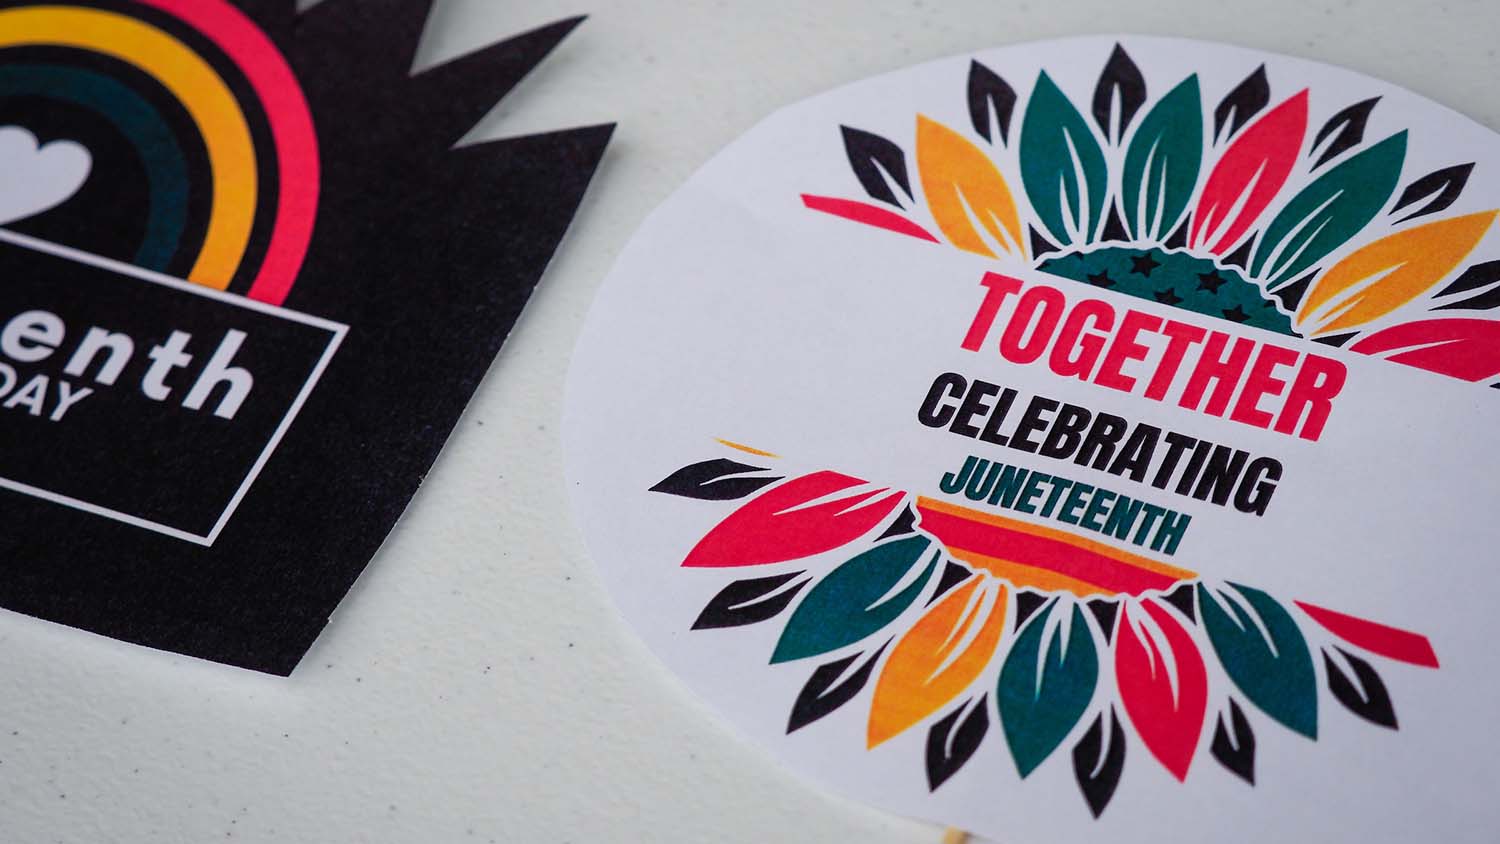 A sticker from a Juneteenth campus celebration reads "Together Celebrating Juneteenth."